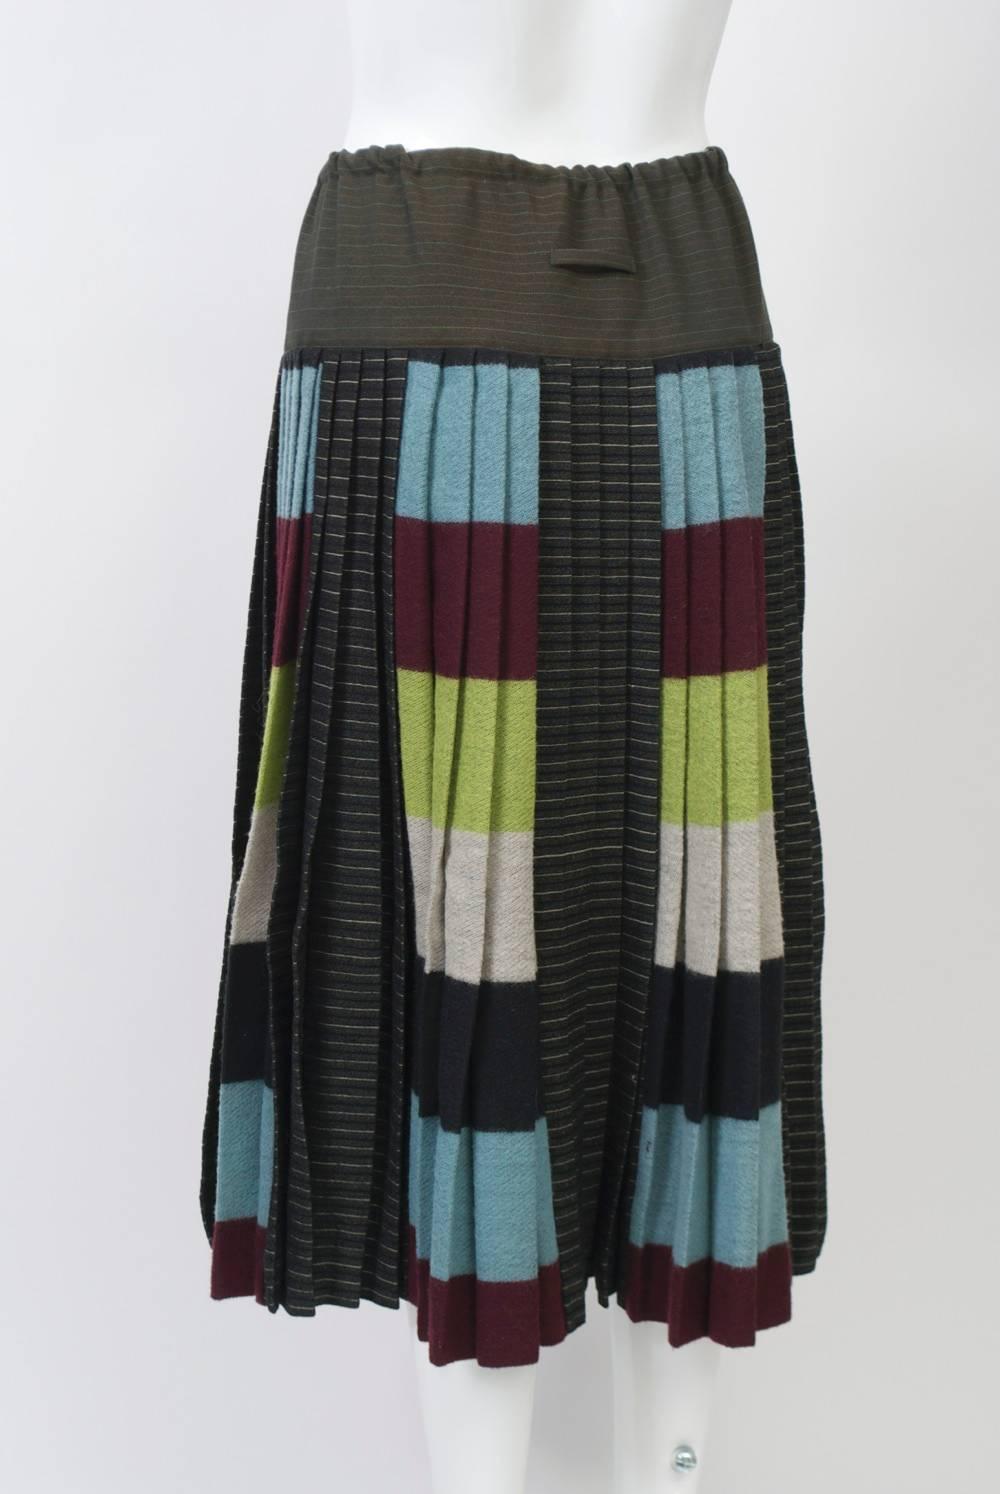 Jean Paul Gaultier knife-pleated skirt in blocks of varied colors, patterns and fabrics (wool, nylon, cotton), a play on combinations for which the designer is well known. The pleats fall from a wide hip band in khaki green with a drawstring waist;